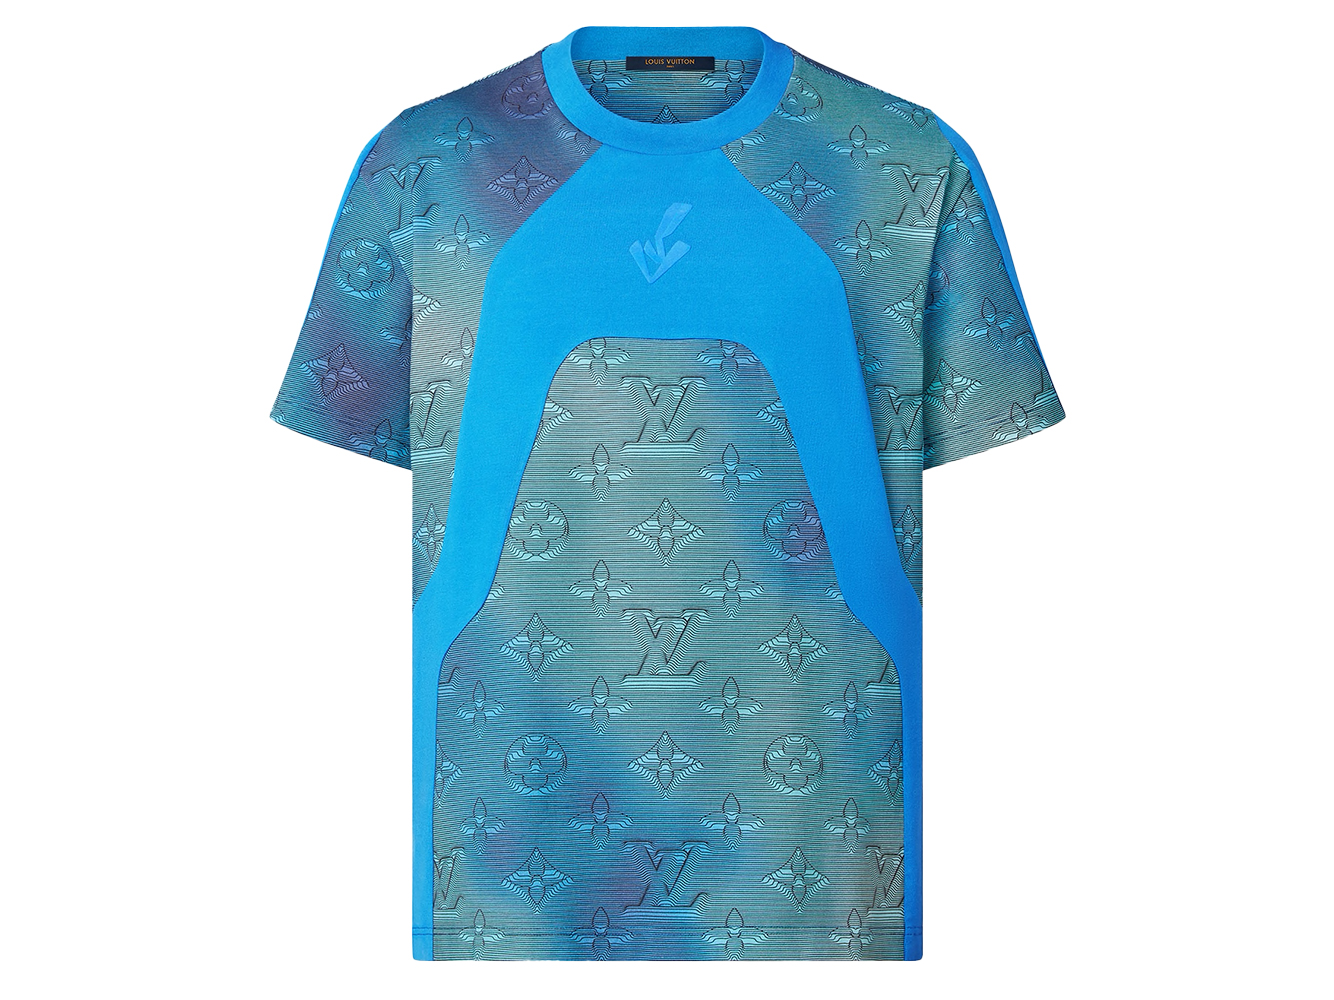 Louis Vuitton Debossed TShirt  Size XL Available For Immediate Sale At  Sothebys